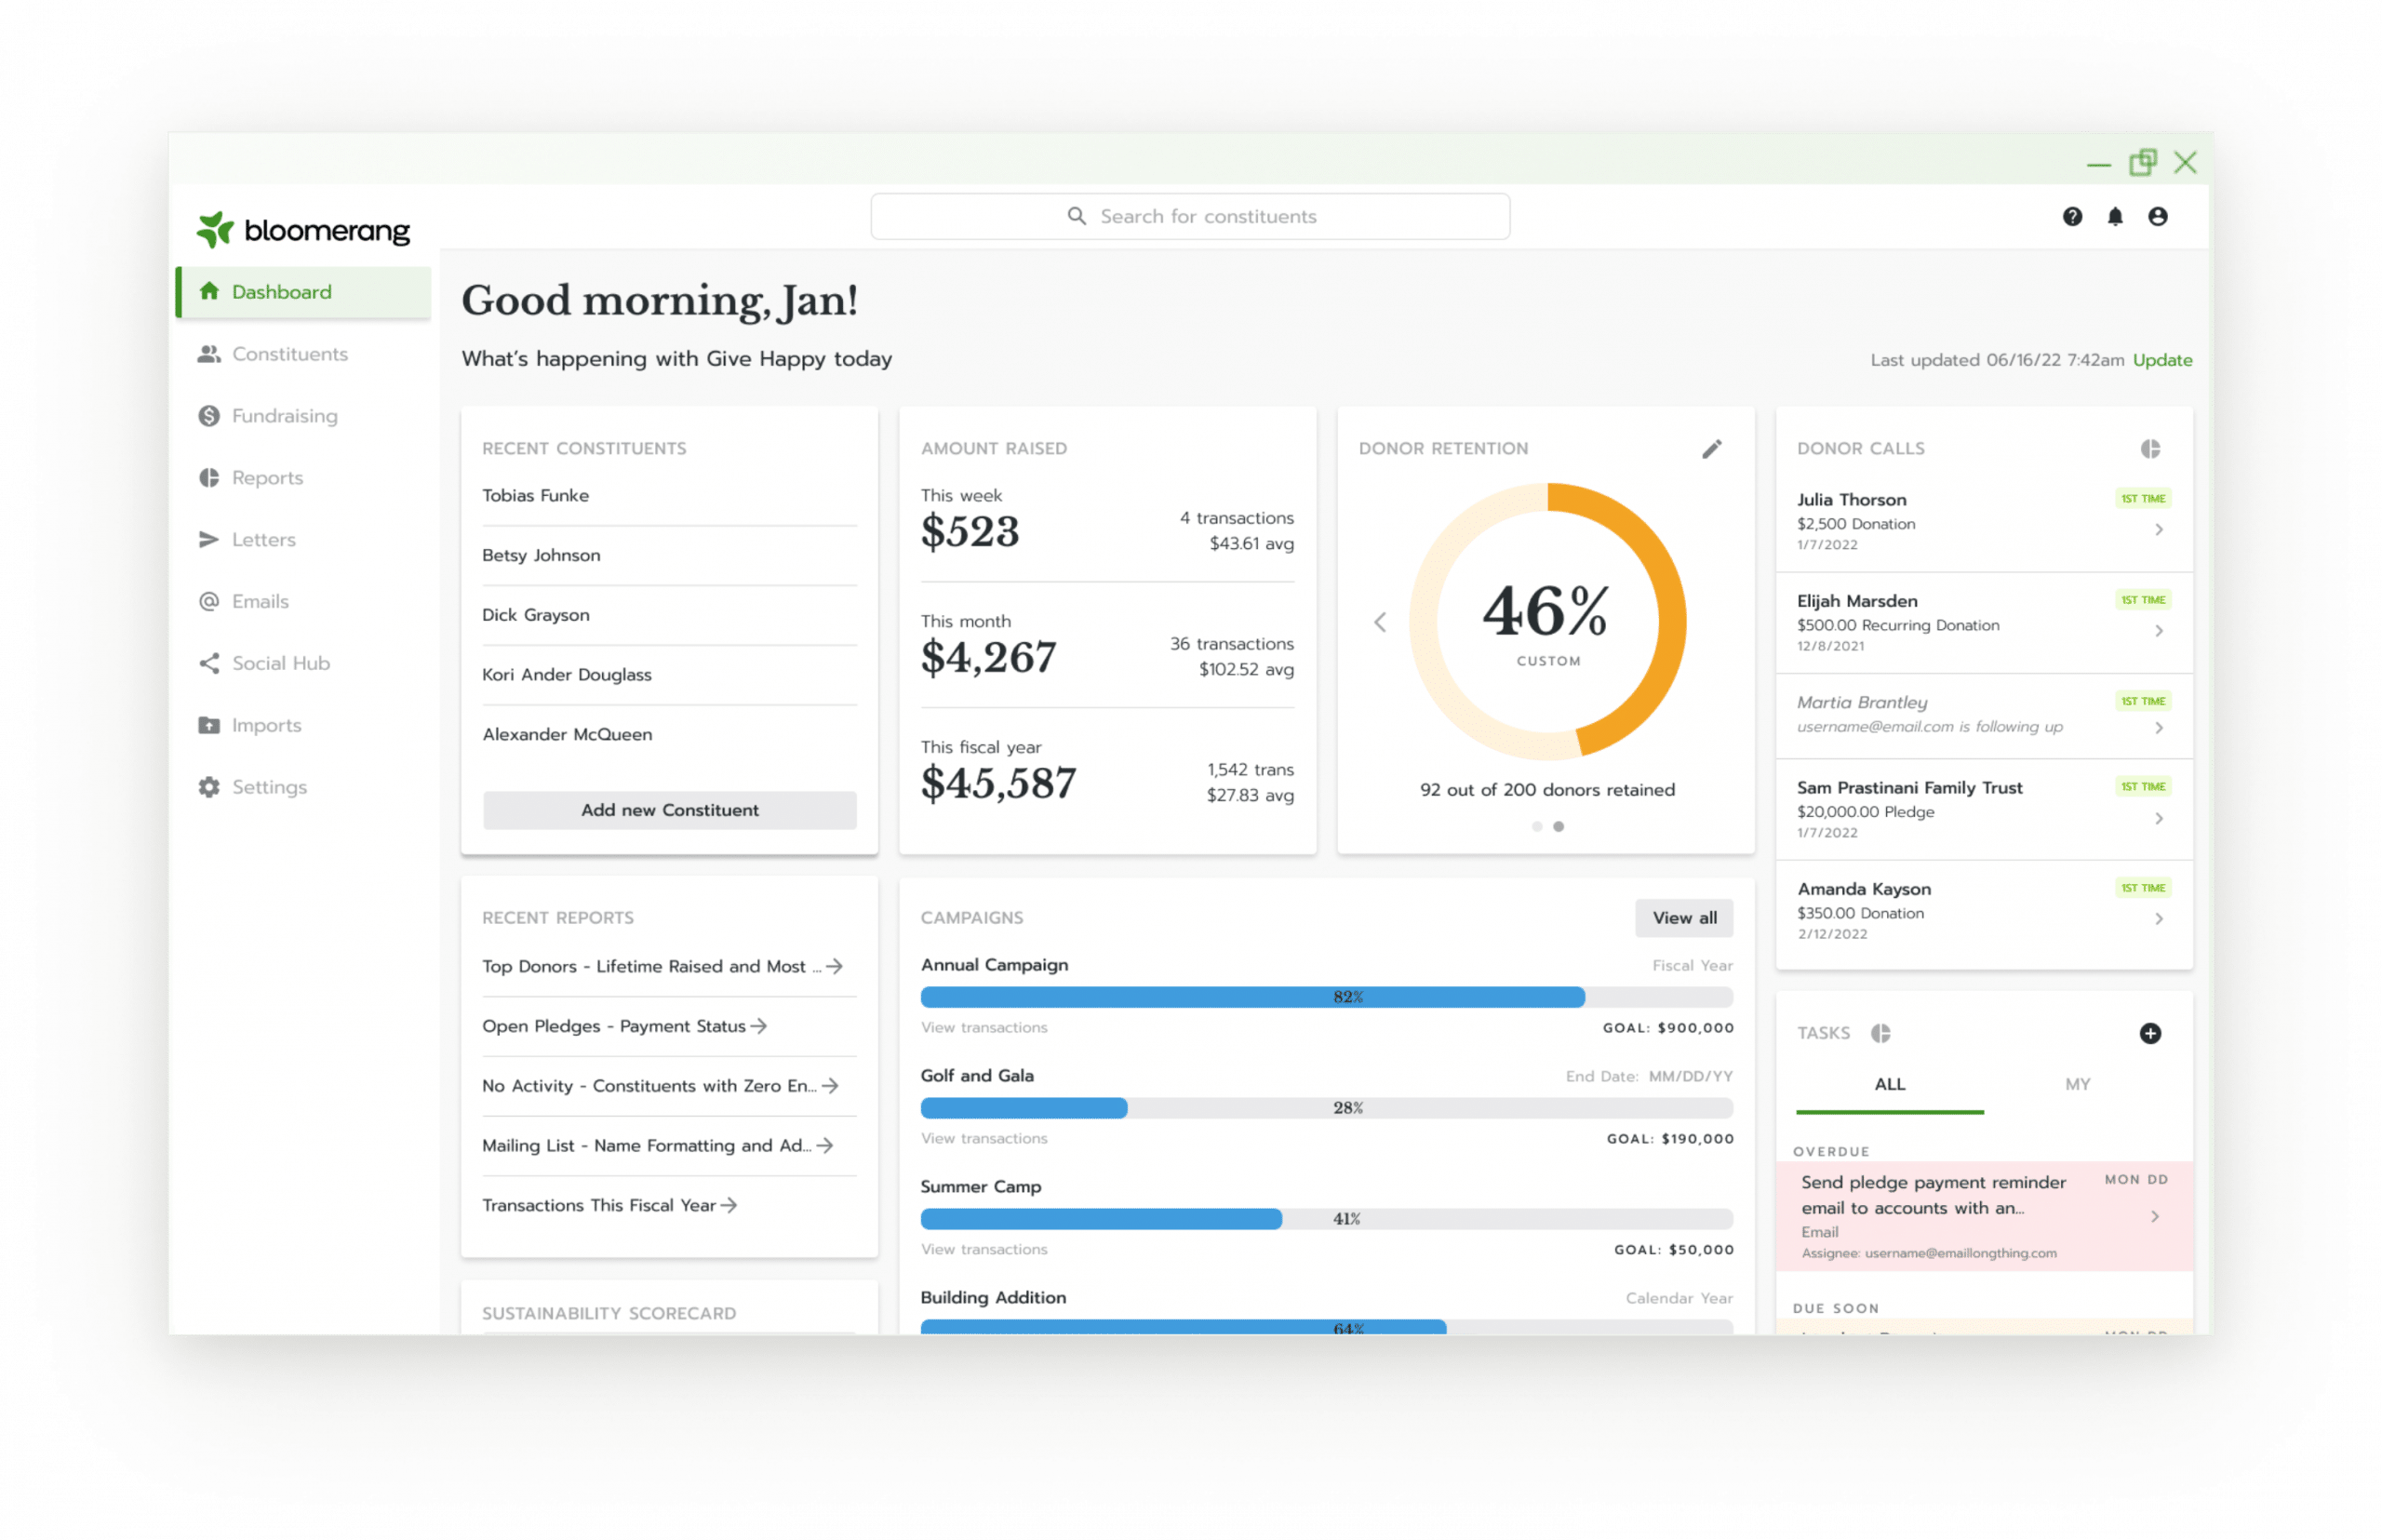 This is a screenshot of Bloomerang’s online fundraising platform.